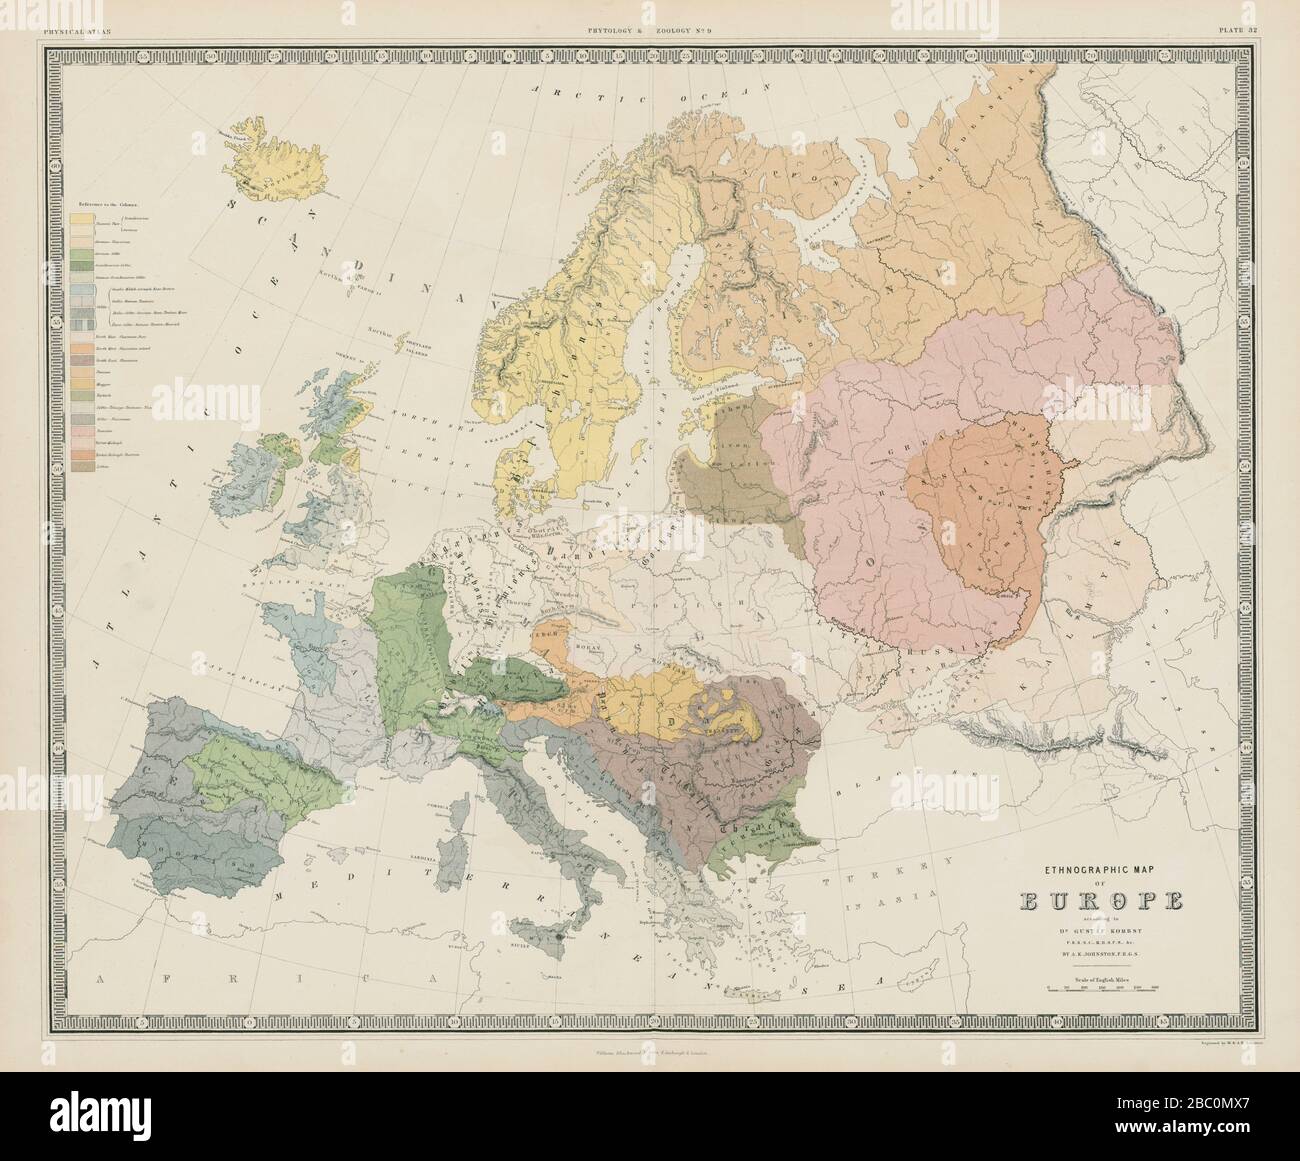 Ethnographic Map of Europe. Ethnicities. JOHNSTON 1856 old antique chart Stock Photo